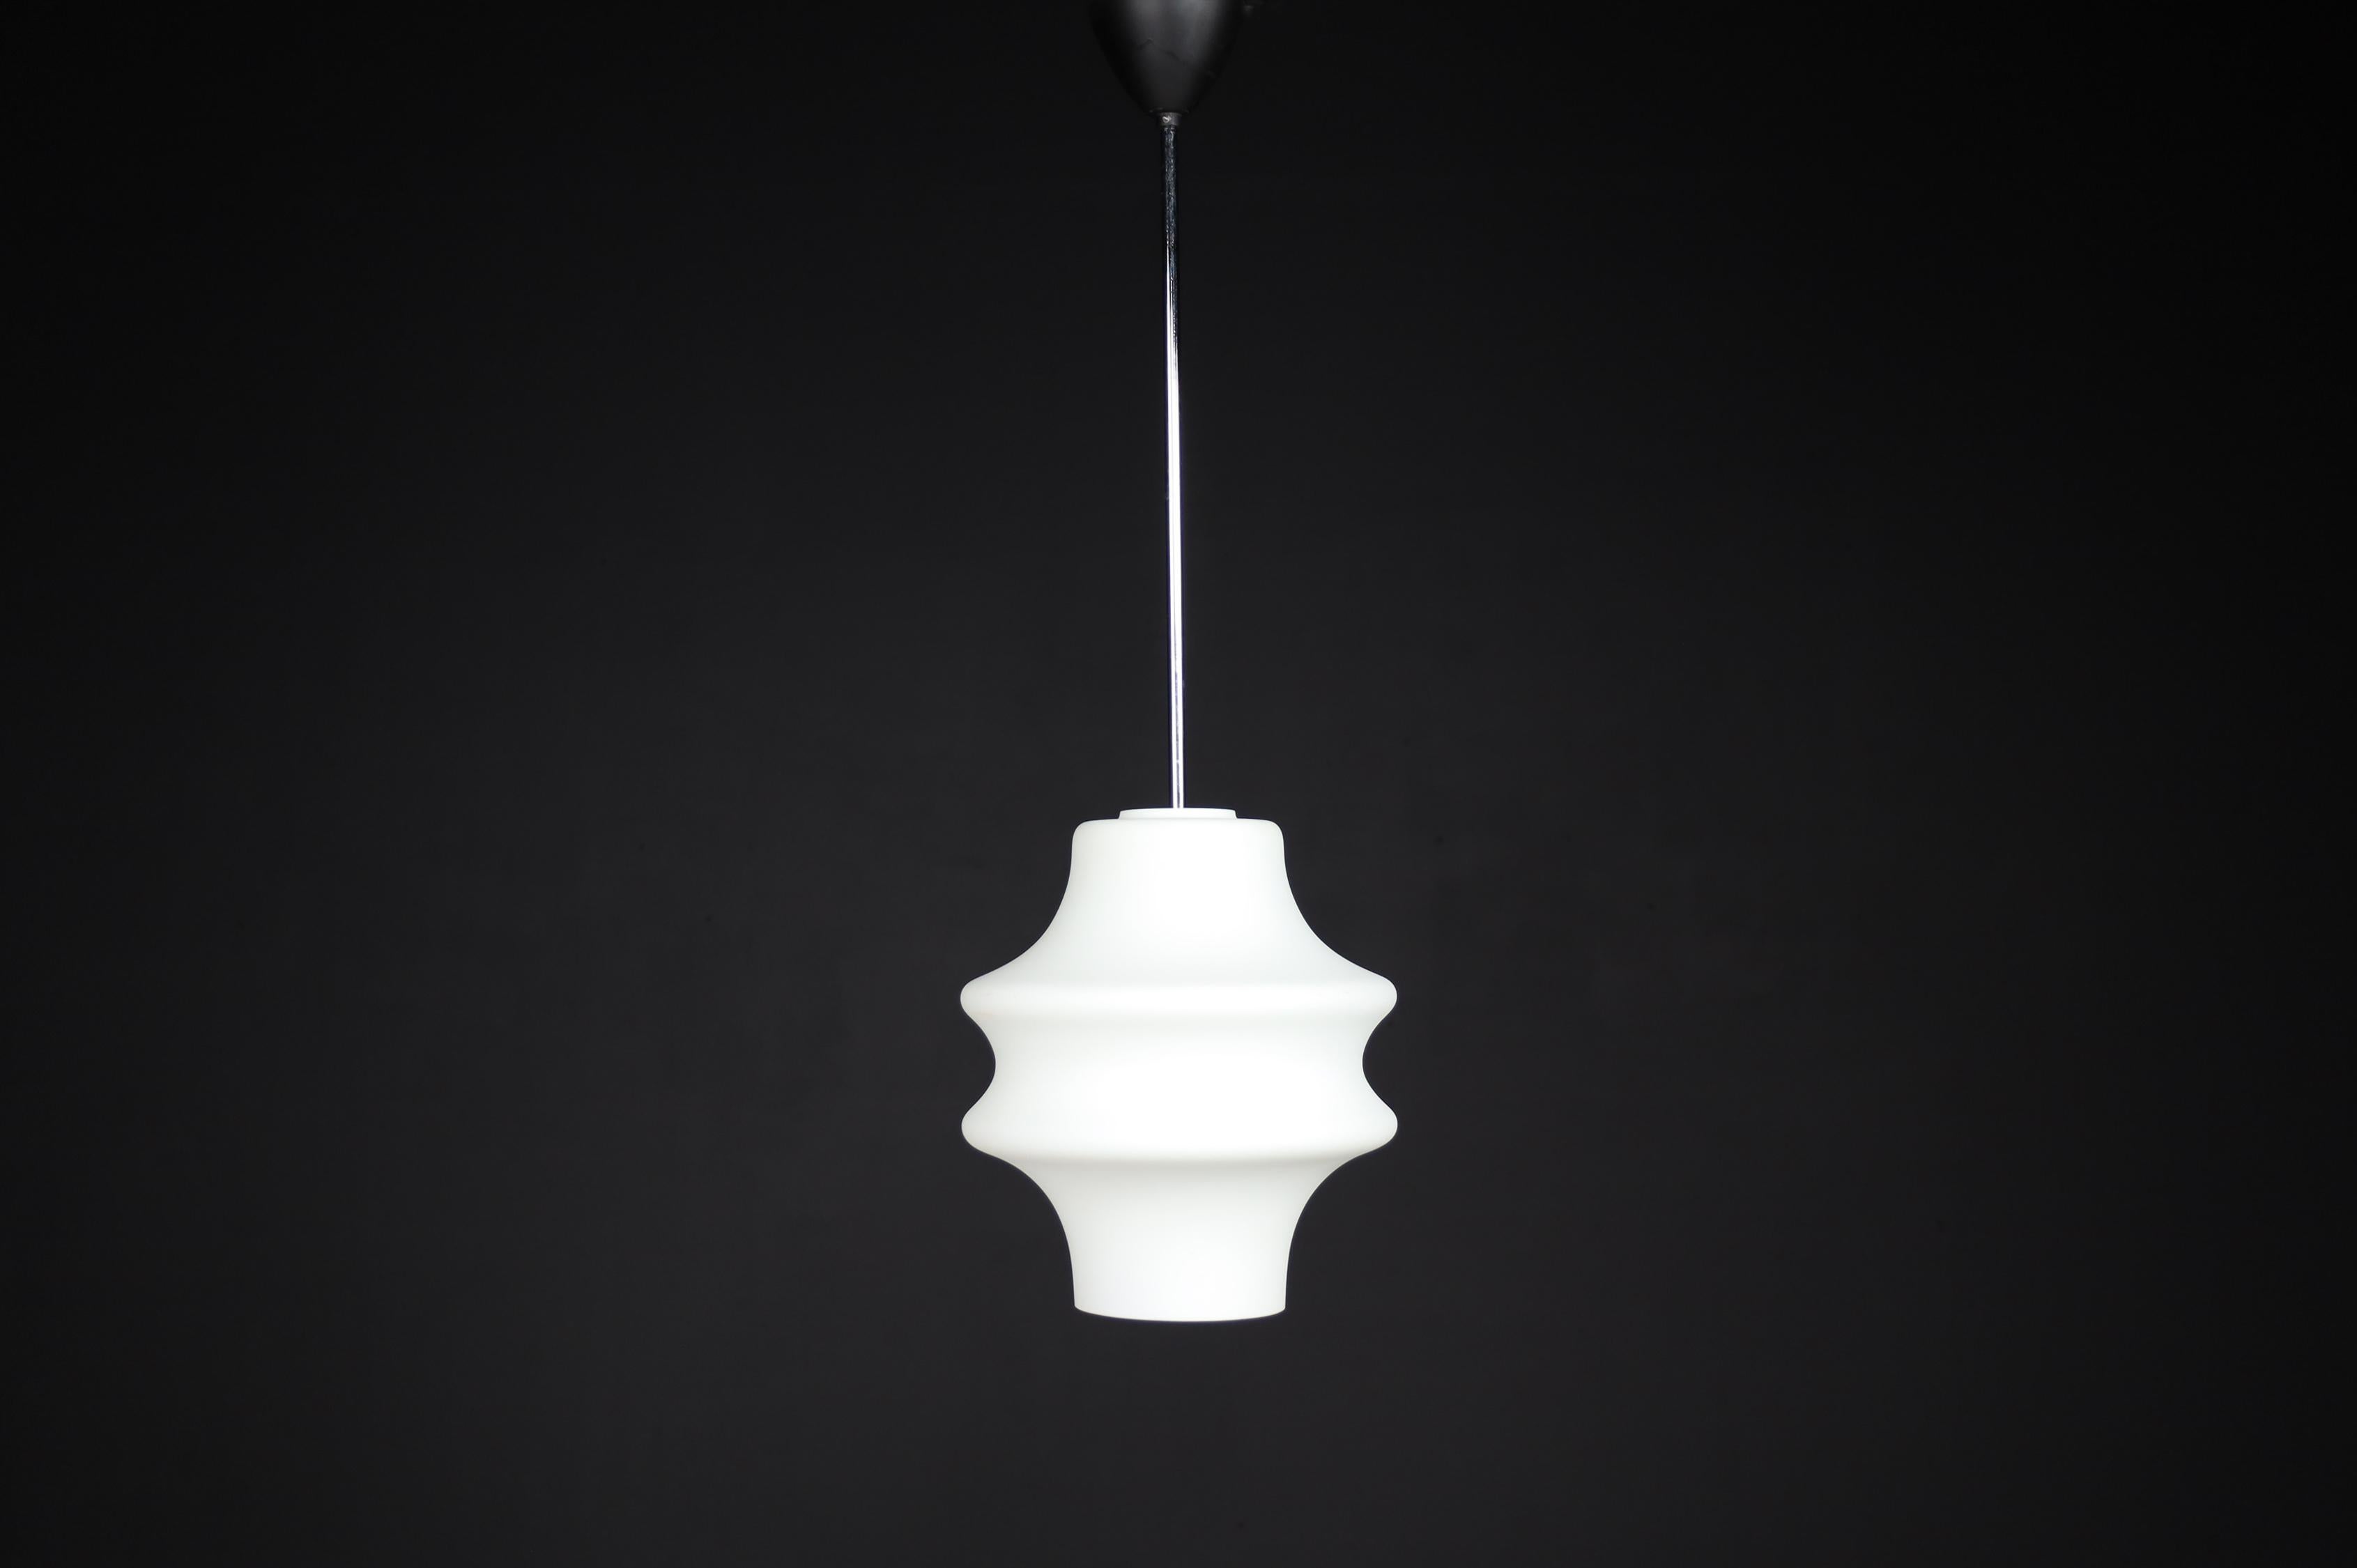 Modern pendants, opaline glass, Europe, the 1960s.

Modern pendants, opaline glass, Europe, the 1960s. The diffuse light it spreads is very atmospheric. Completed with opaline glass and metal frame details, these pendants will contribute to the